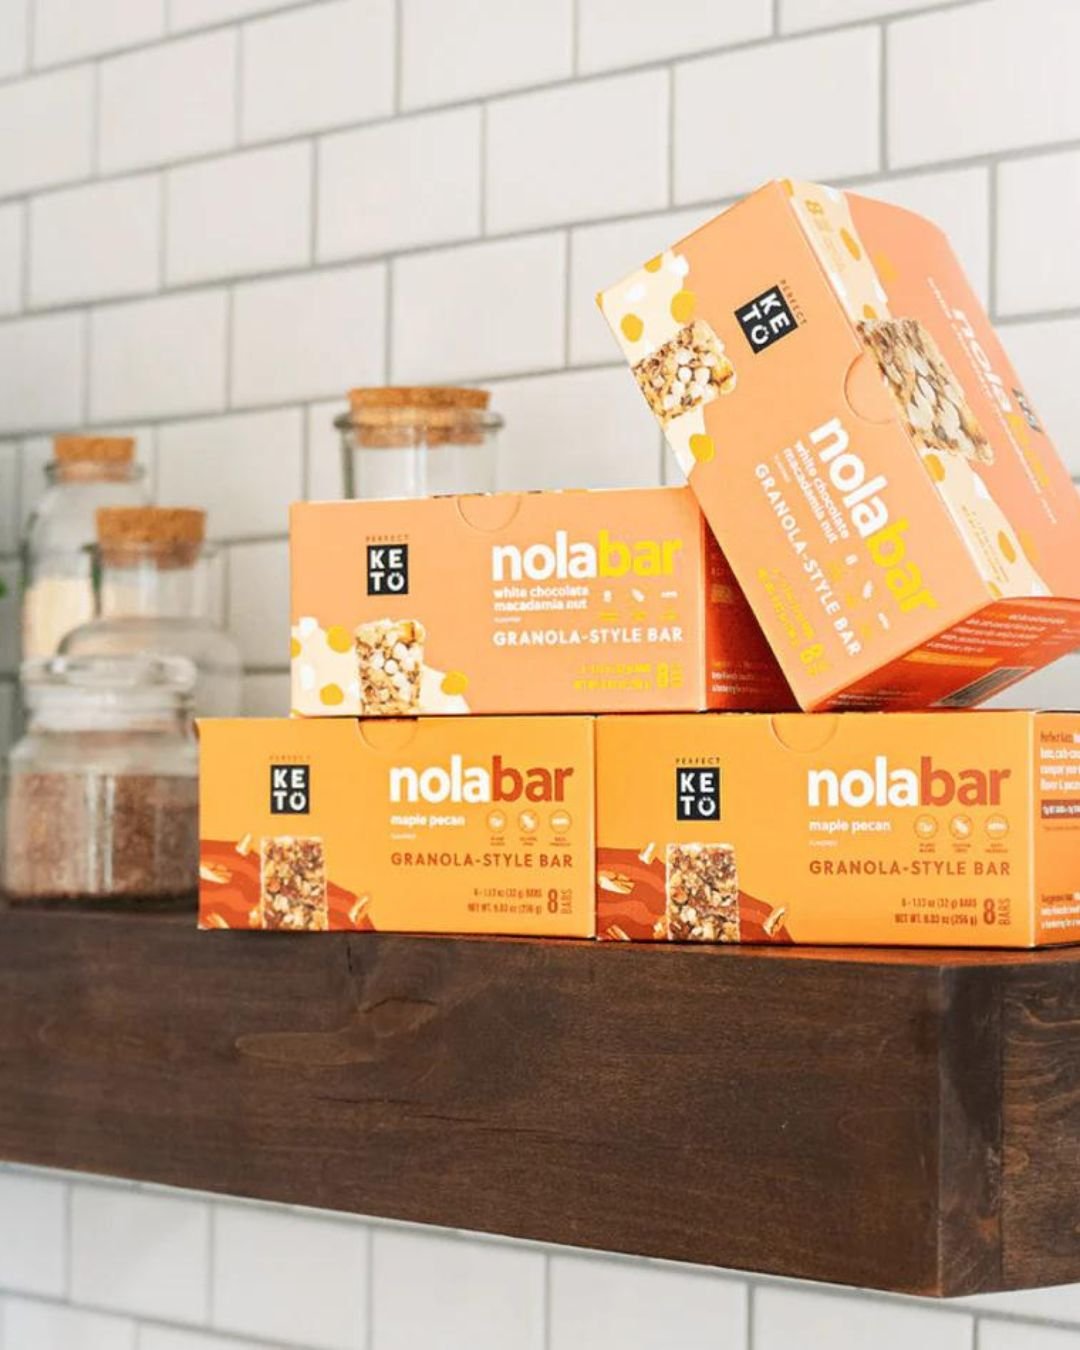 The Perfect Keto Nola Bars are perfect for on-the-go snacking! They're chewy, grain-free, keto-friendly granola-style bars that taste just like rice crispy bars. The great thing is that they are only 1-3g net carbs per bar.